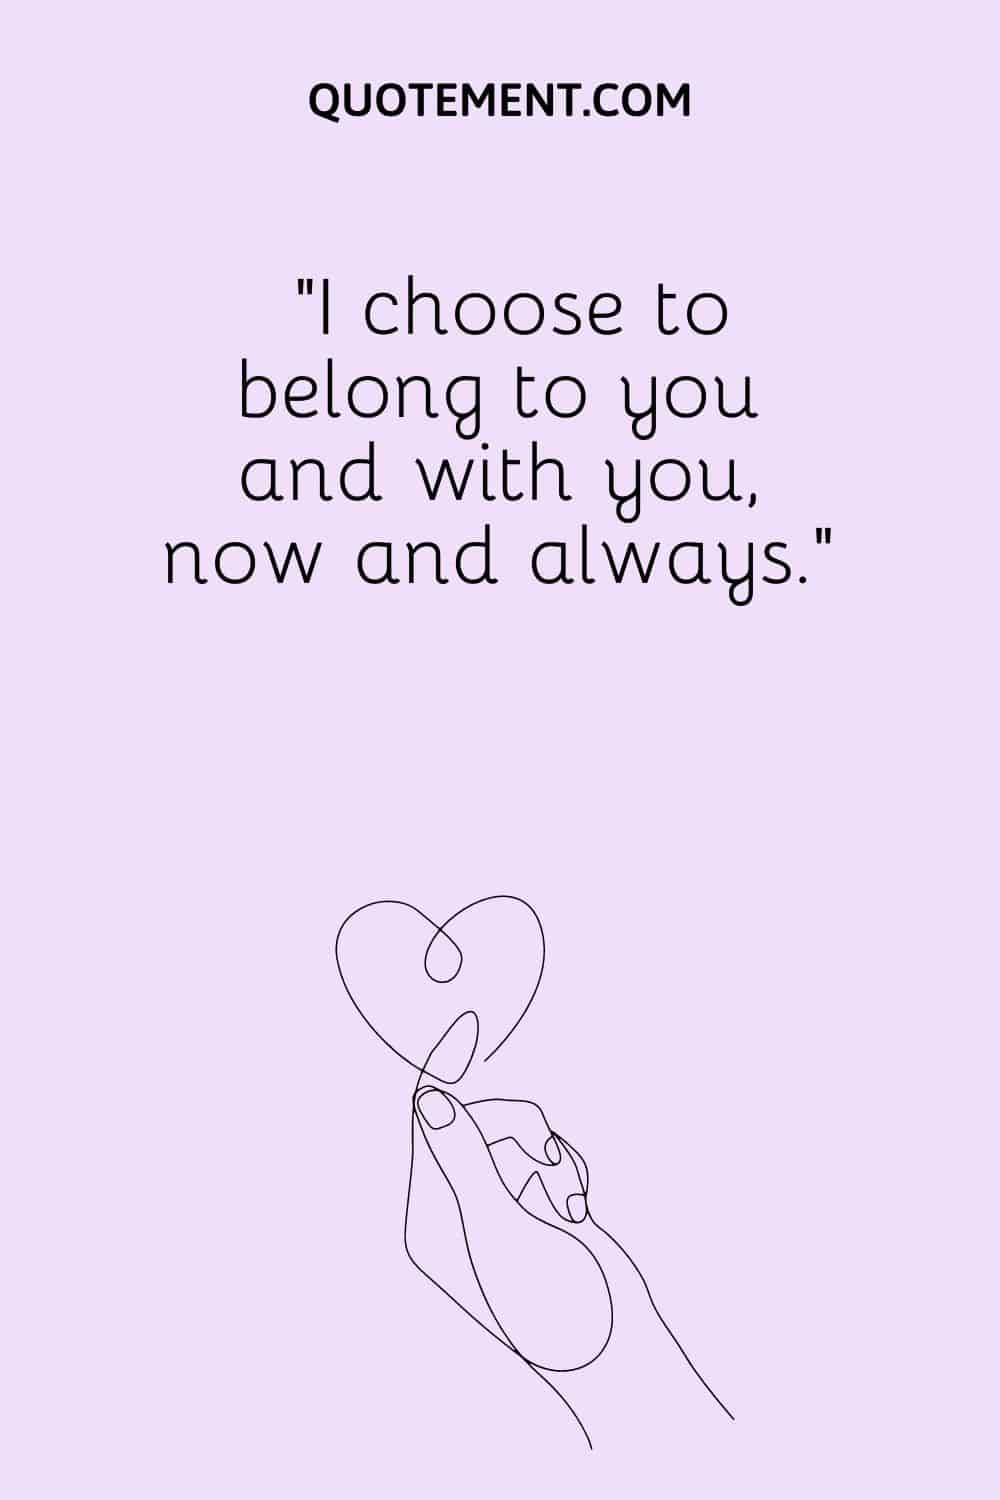 I choose to belong to you and with you, now and always